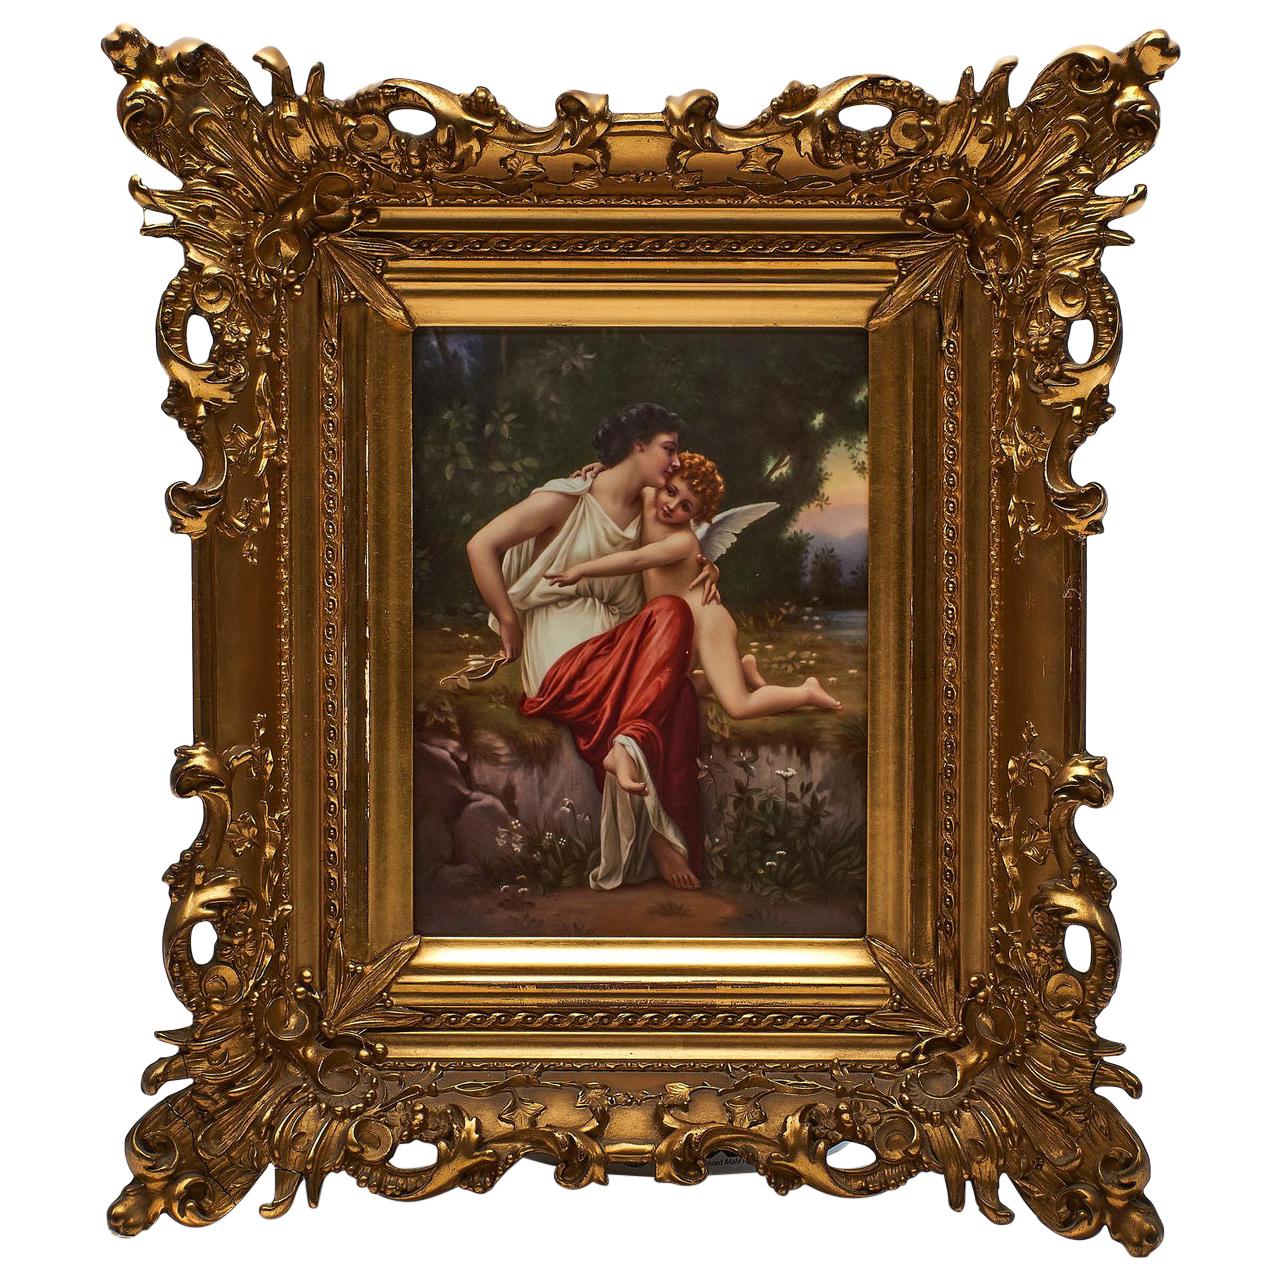 KPM Porcelain Plaque of a Goddess and Cupid